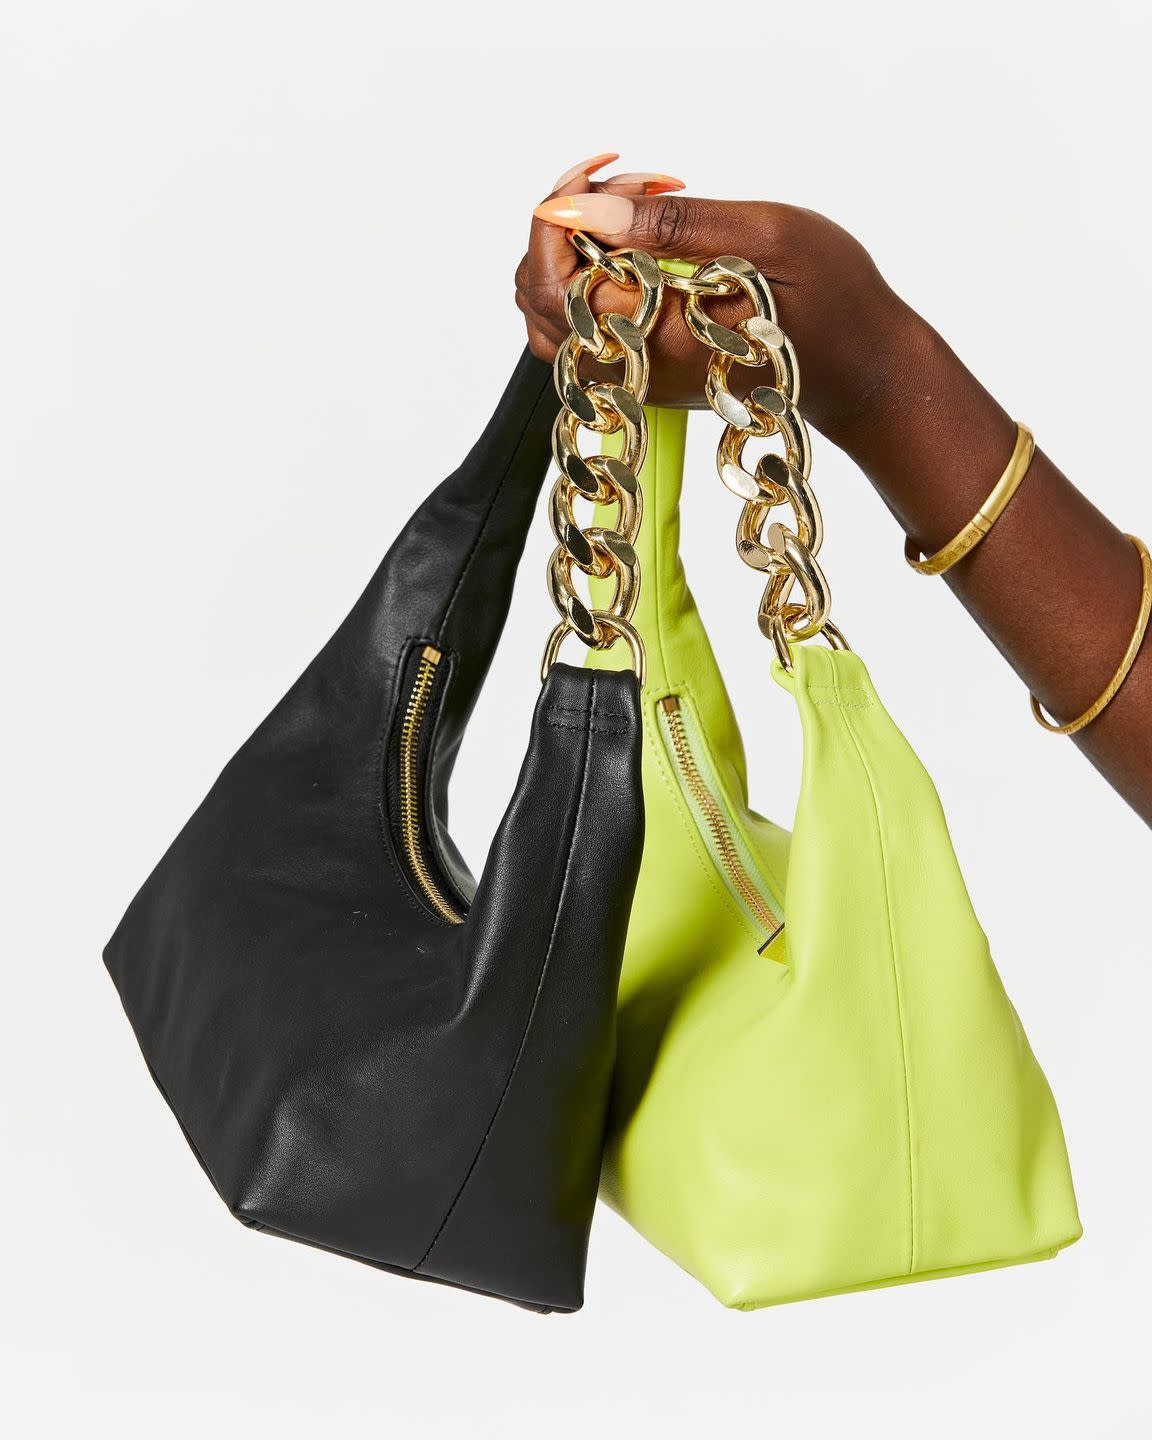 one black bag and one neon yellow leather bag side by side